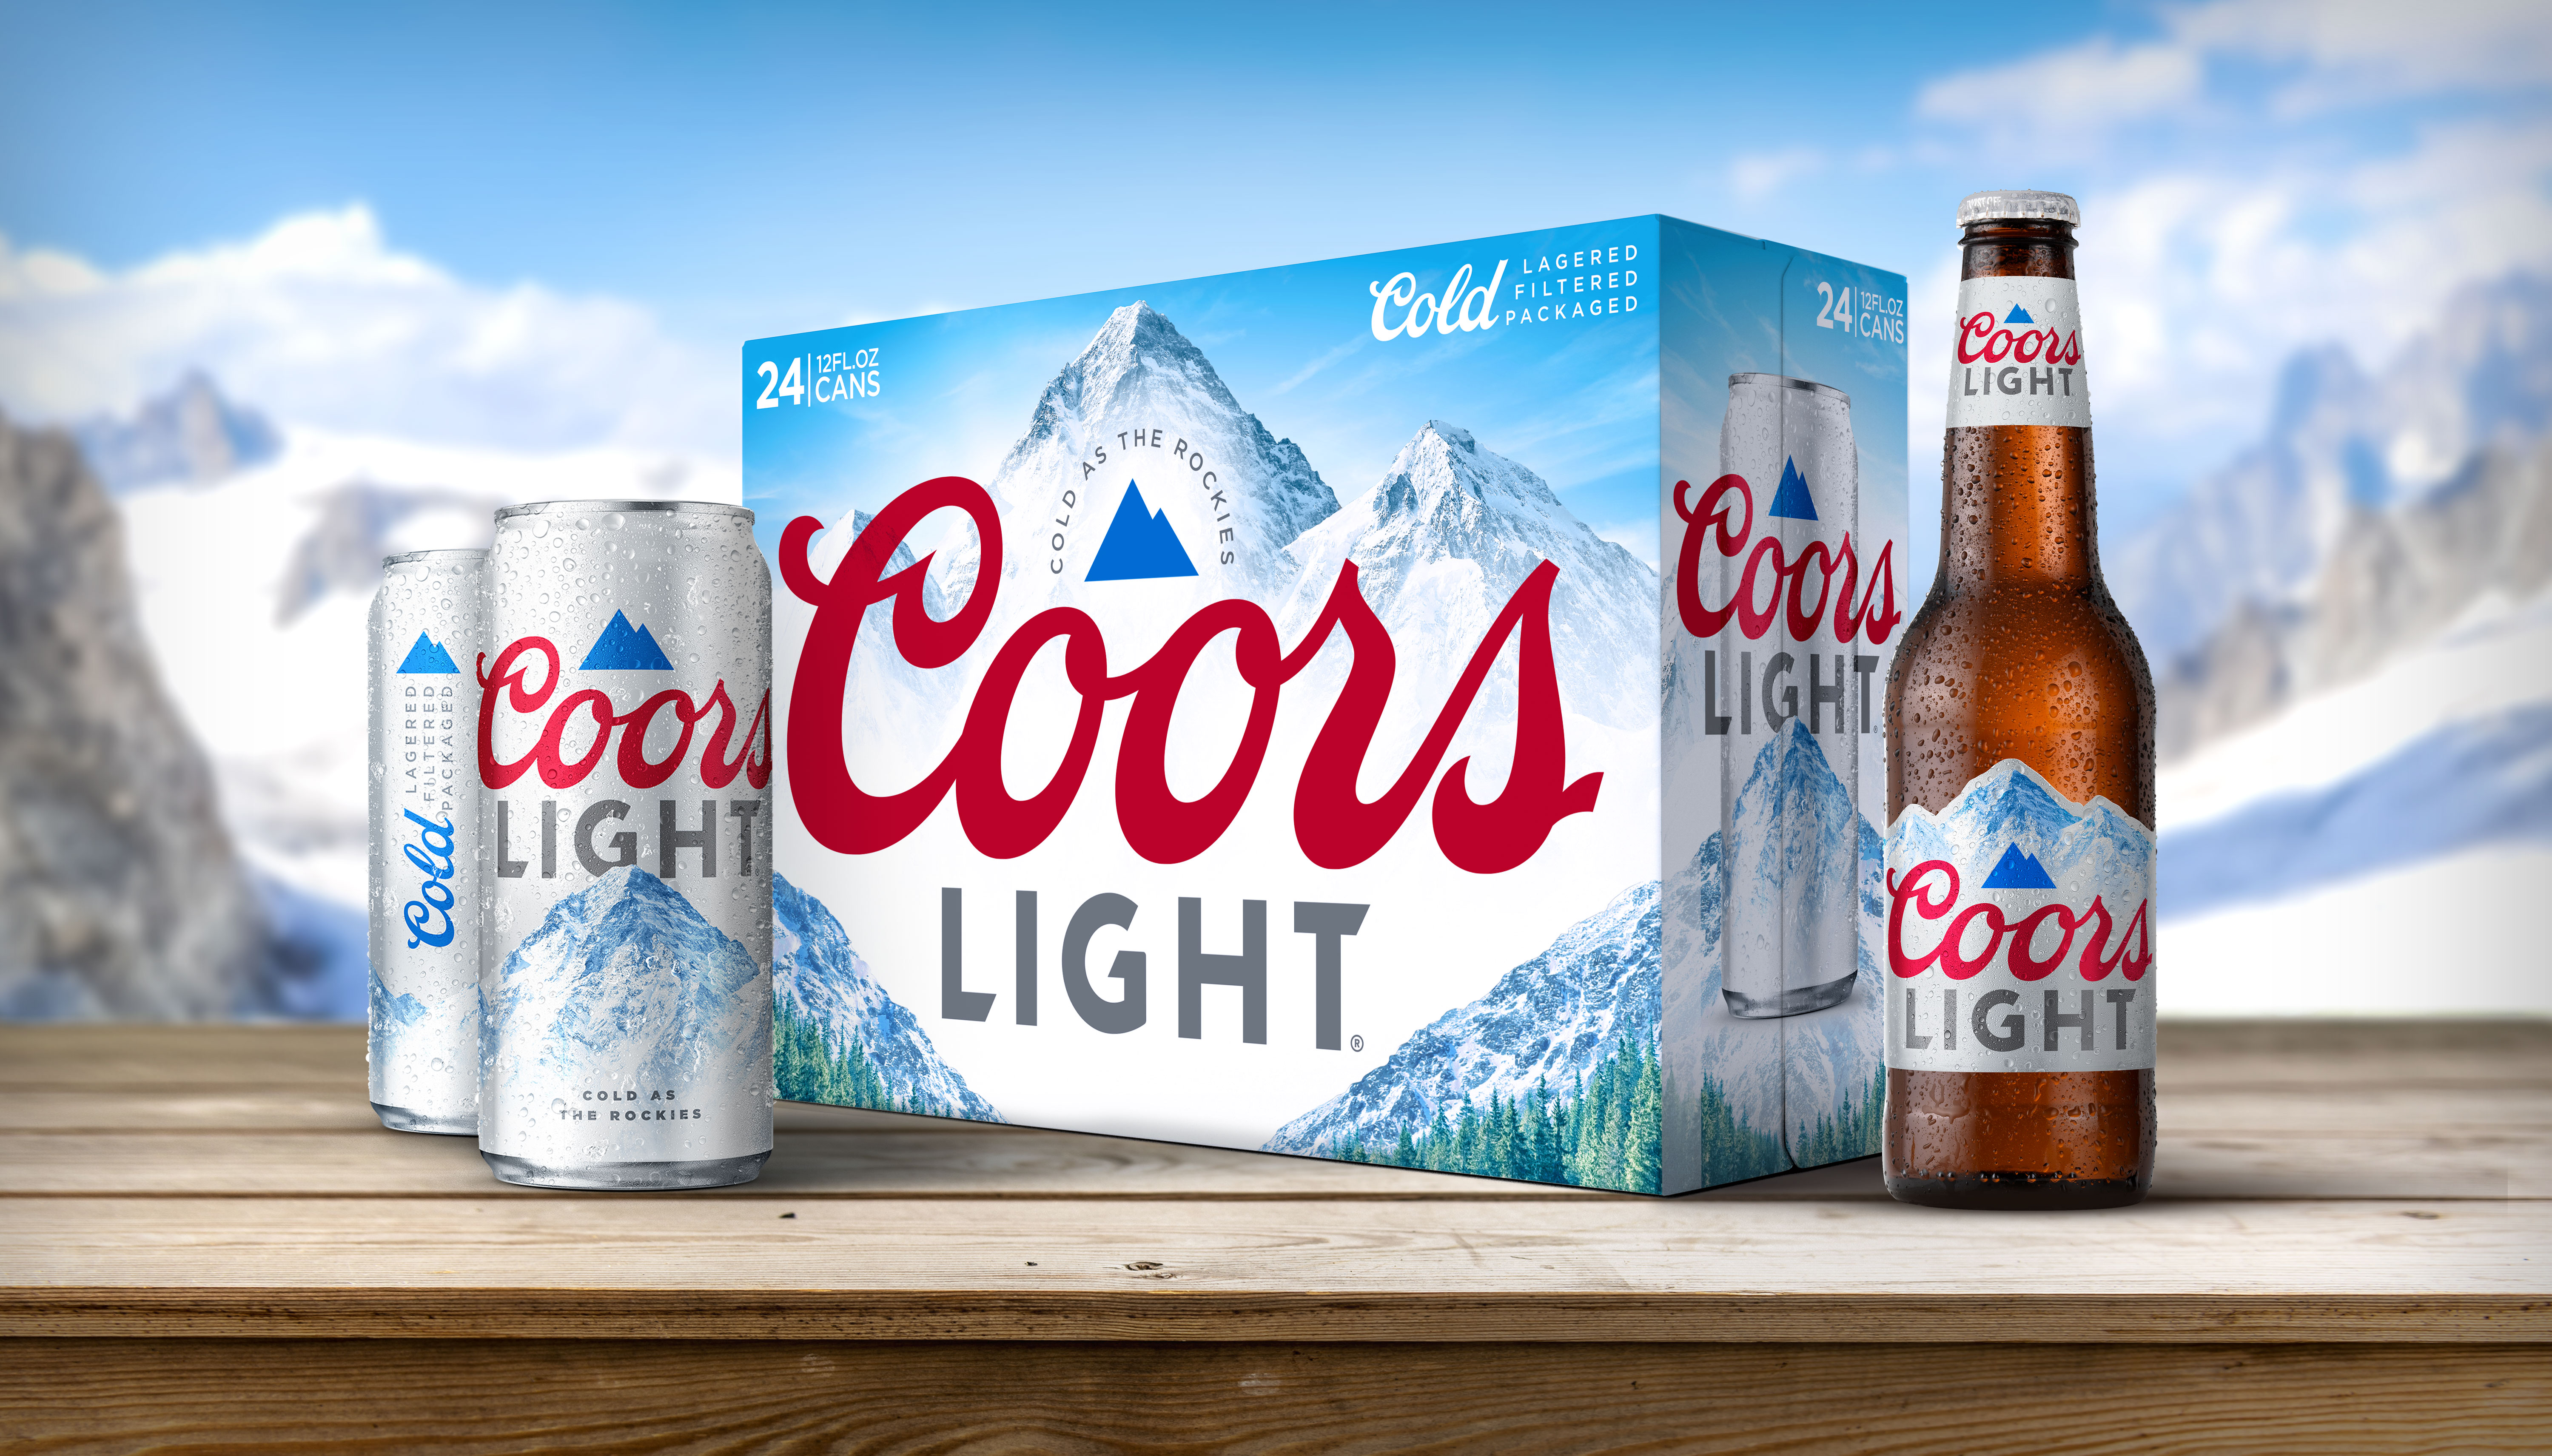 alcohol-content-coors-light-usa-shelly-lighting